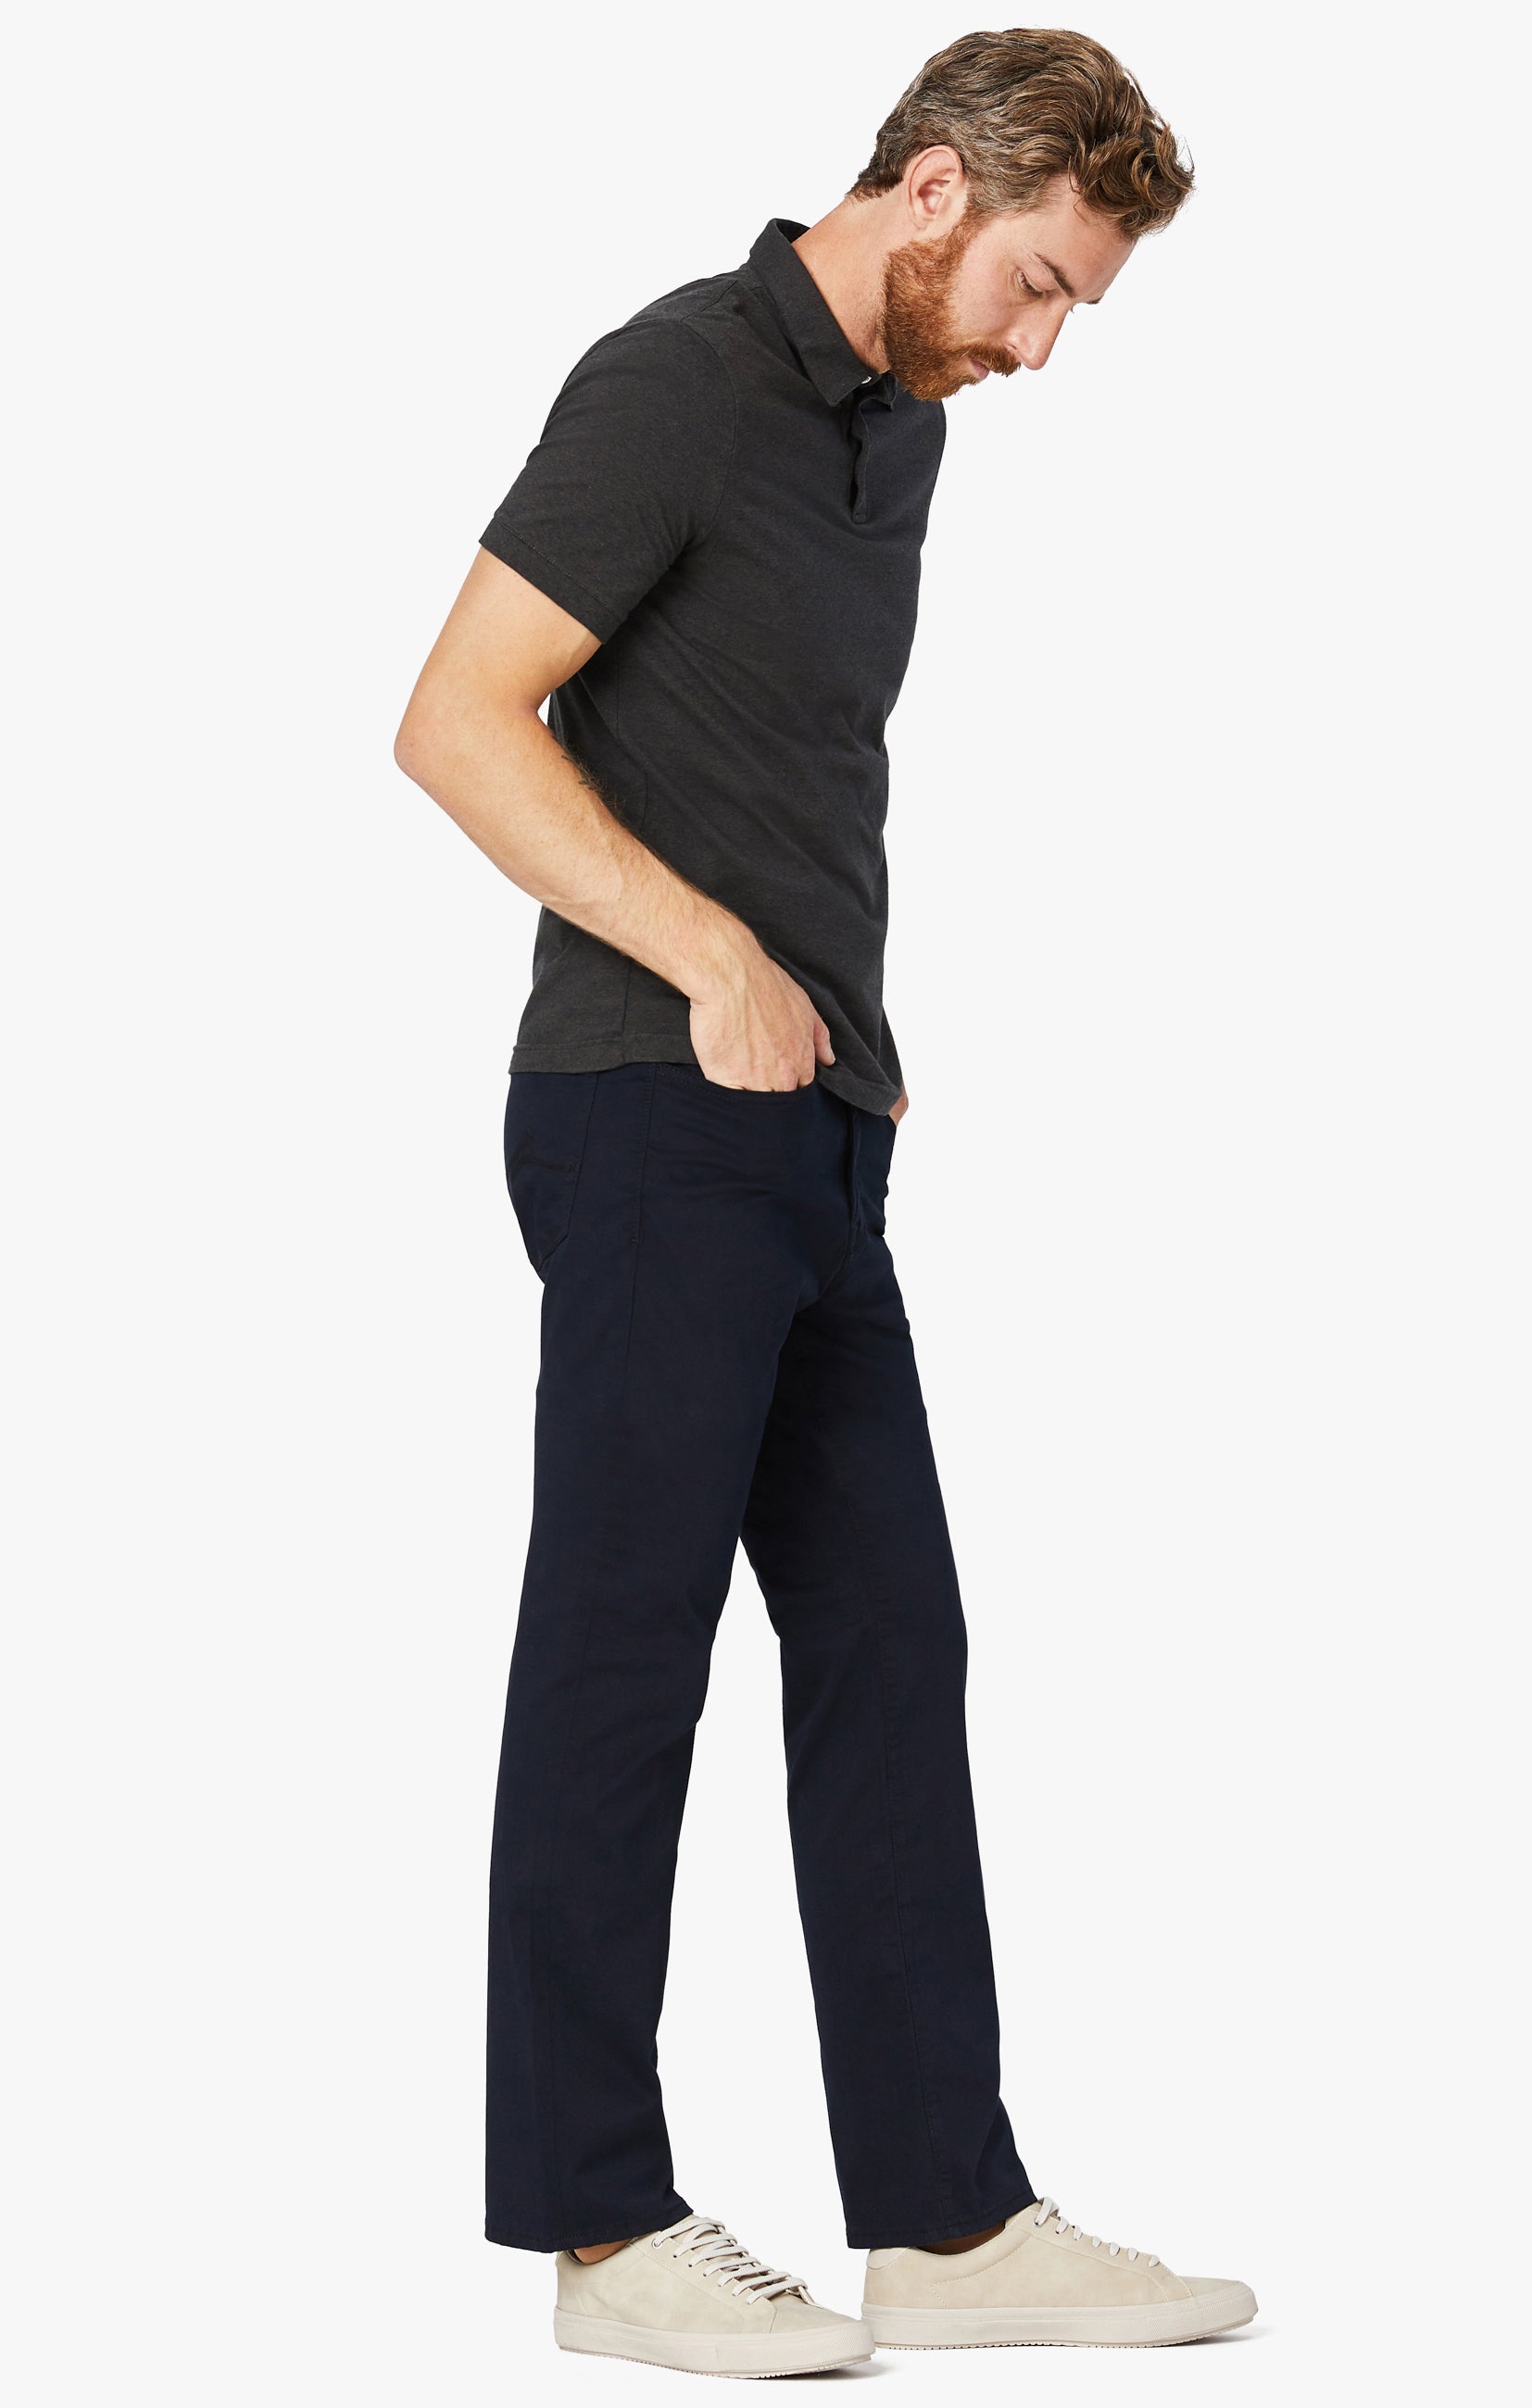 Charisma Classic Fit Pants in Navy Twill Image 5